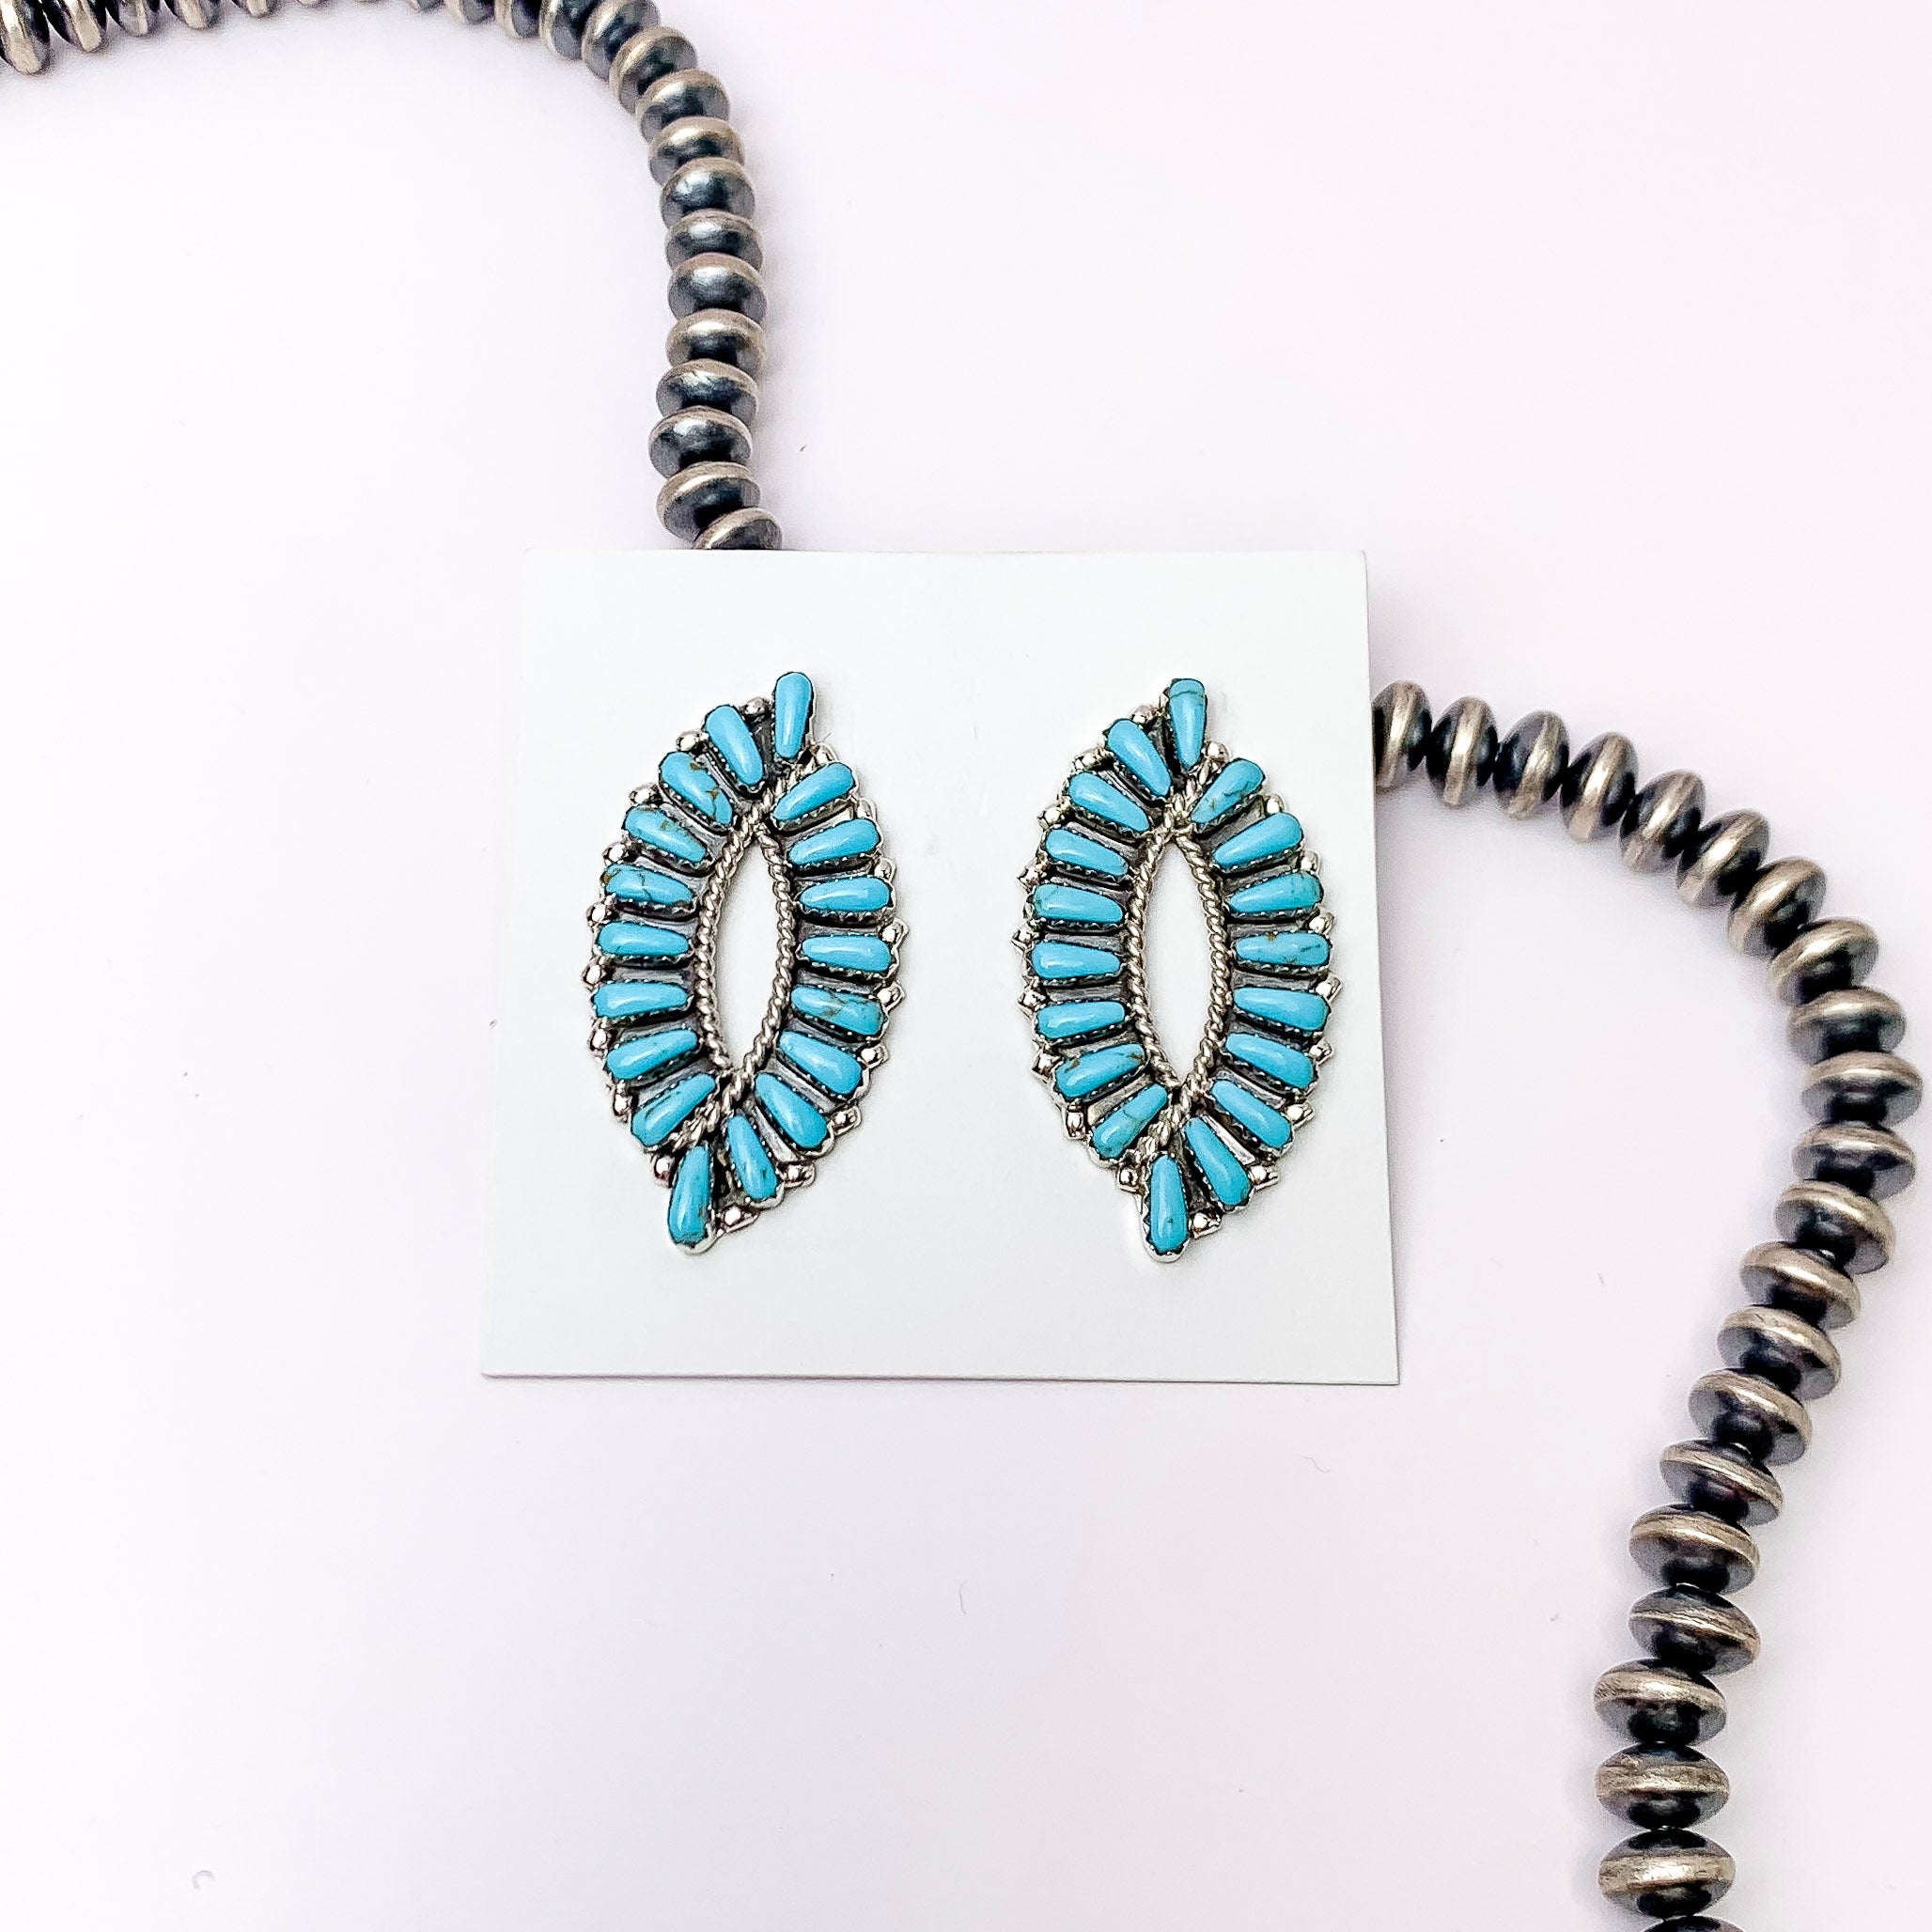 Centered in the picture is genuine turquoise cluster earrings on a white background with a strand of navajo pearls behind the earrings. 